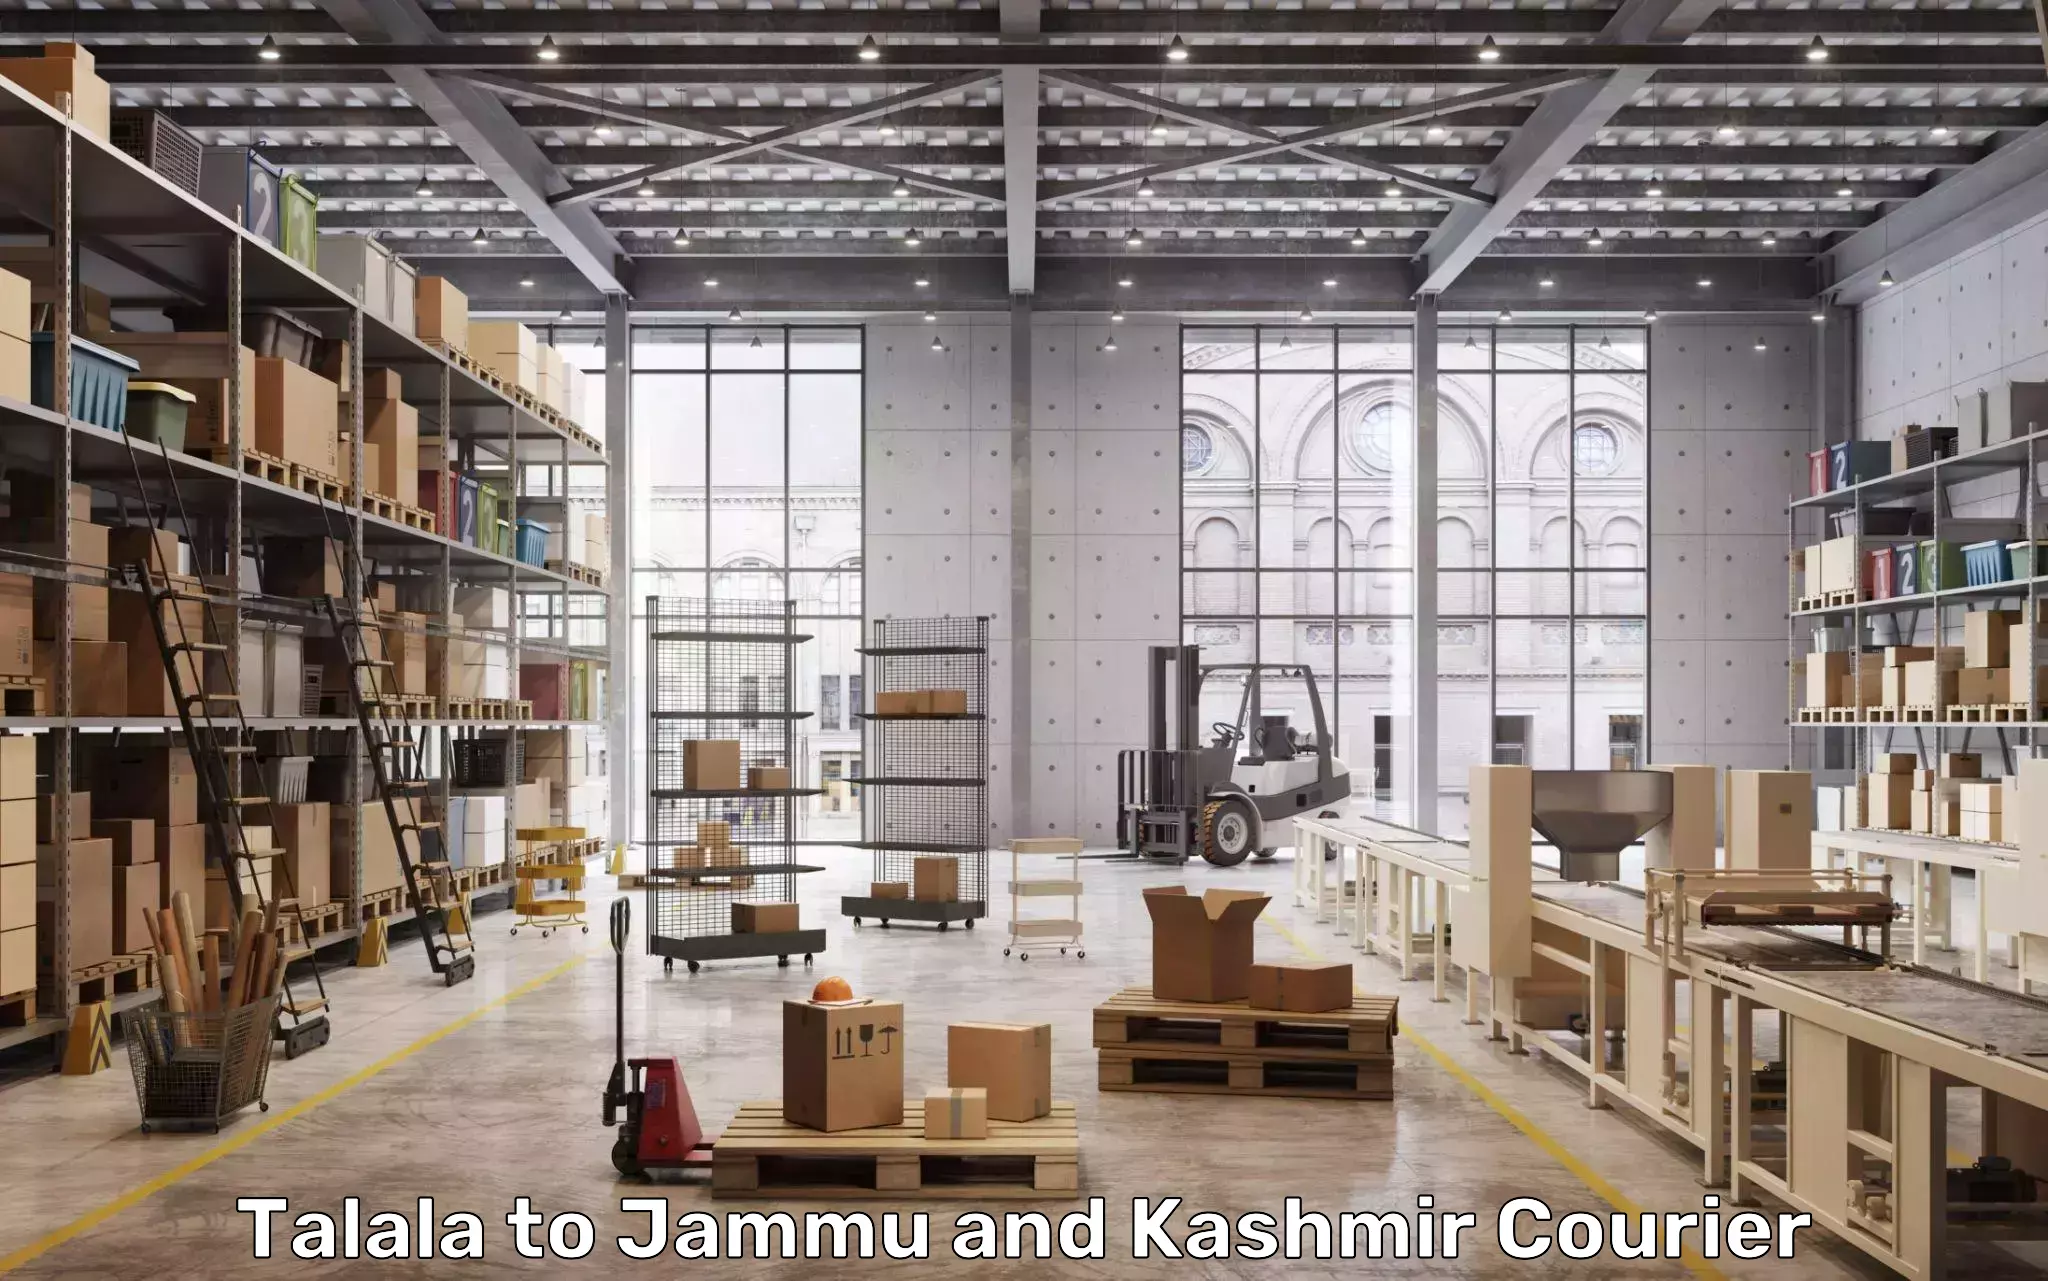 Luggage transport consultancy Talala to Jammu and Kashmir